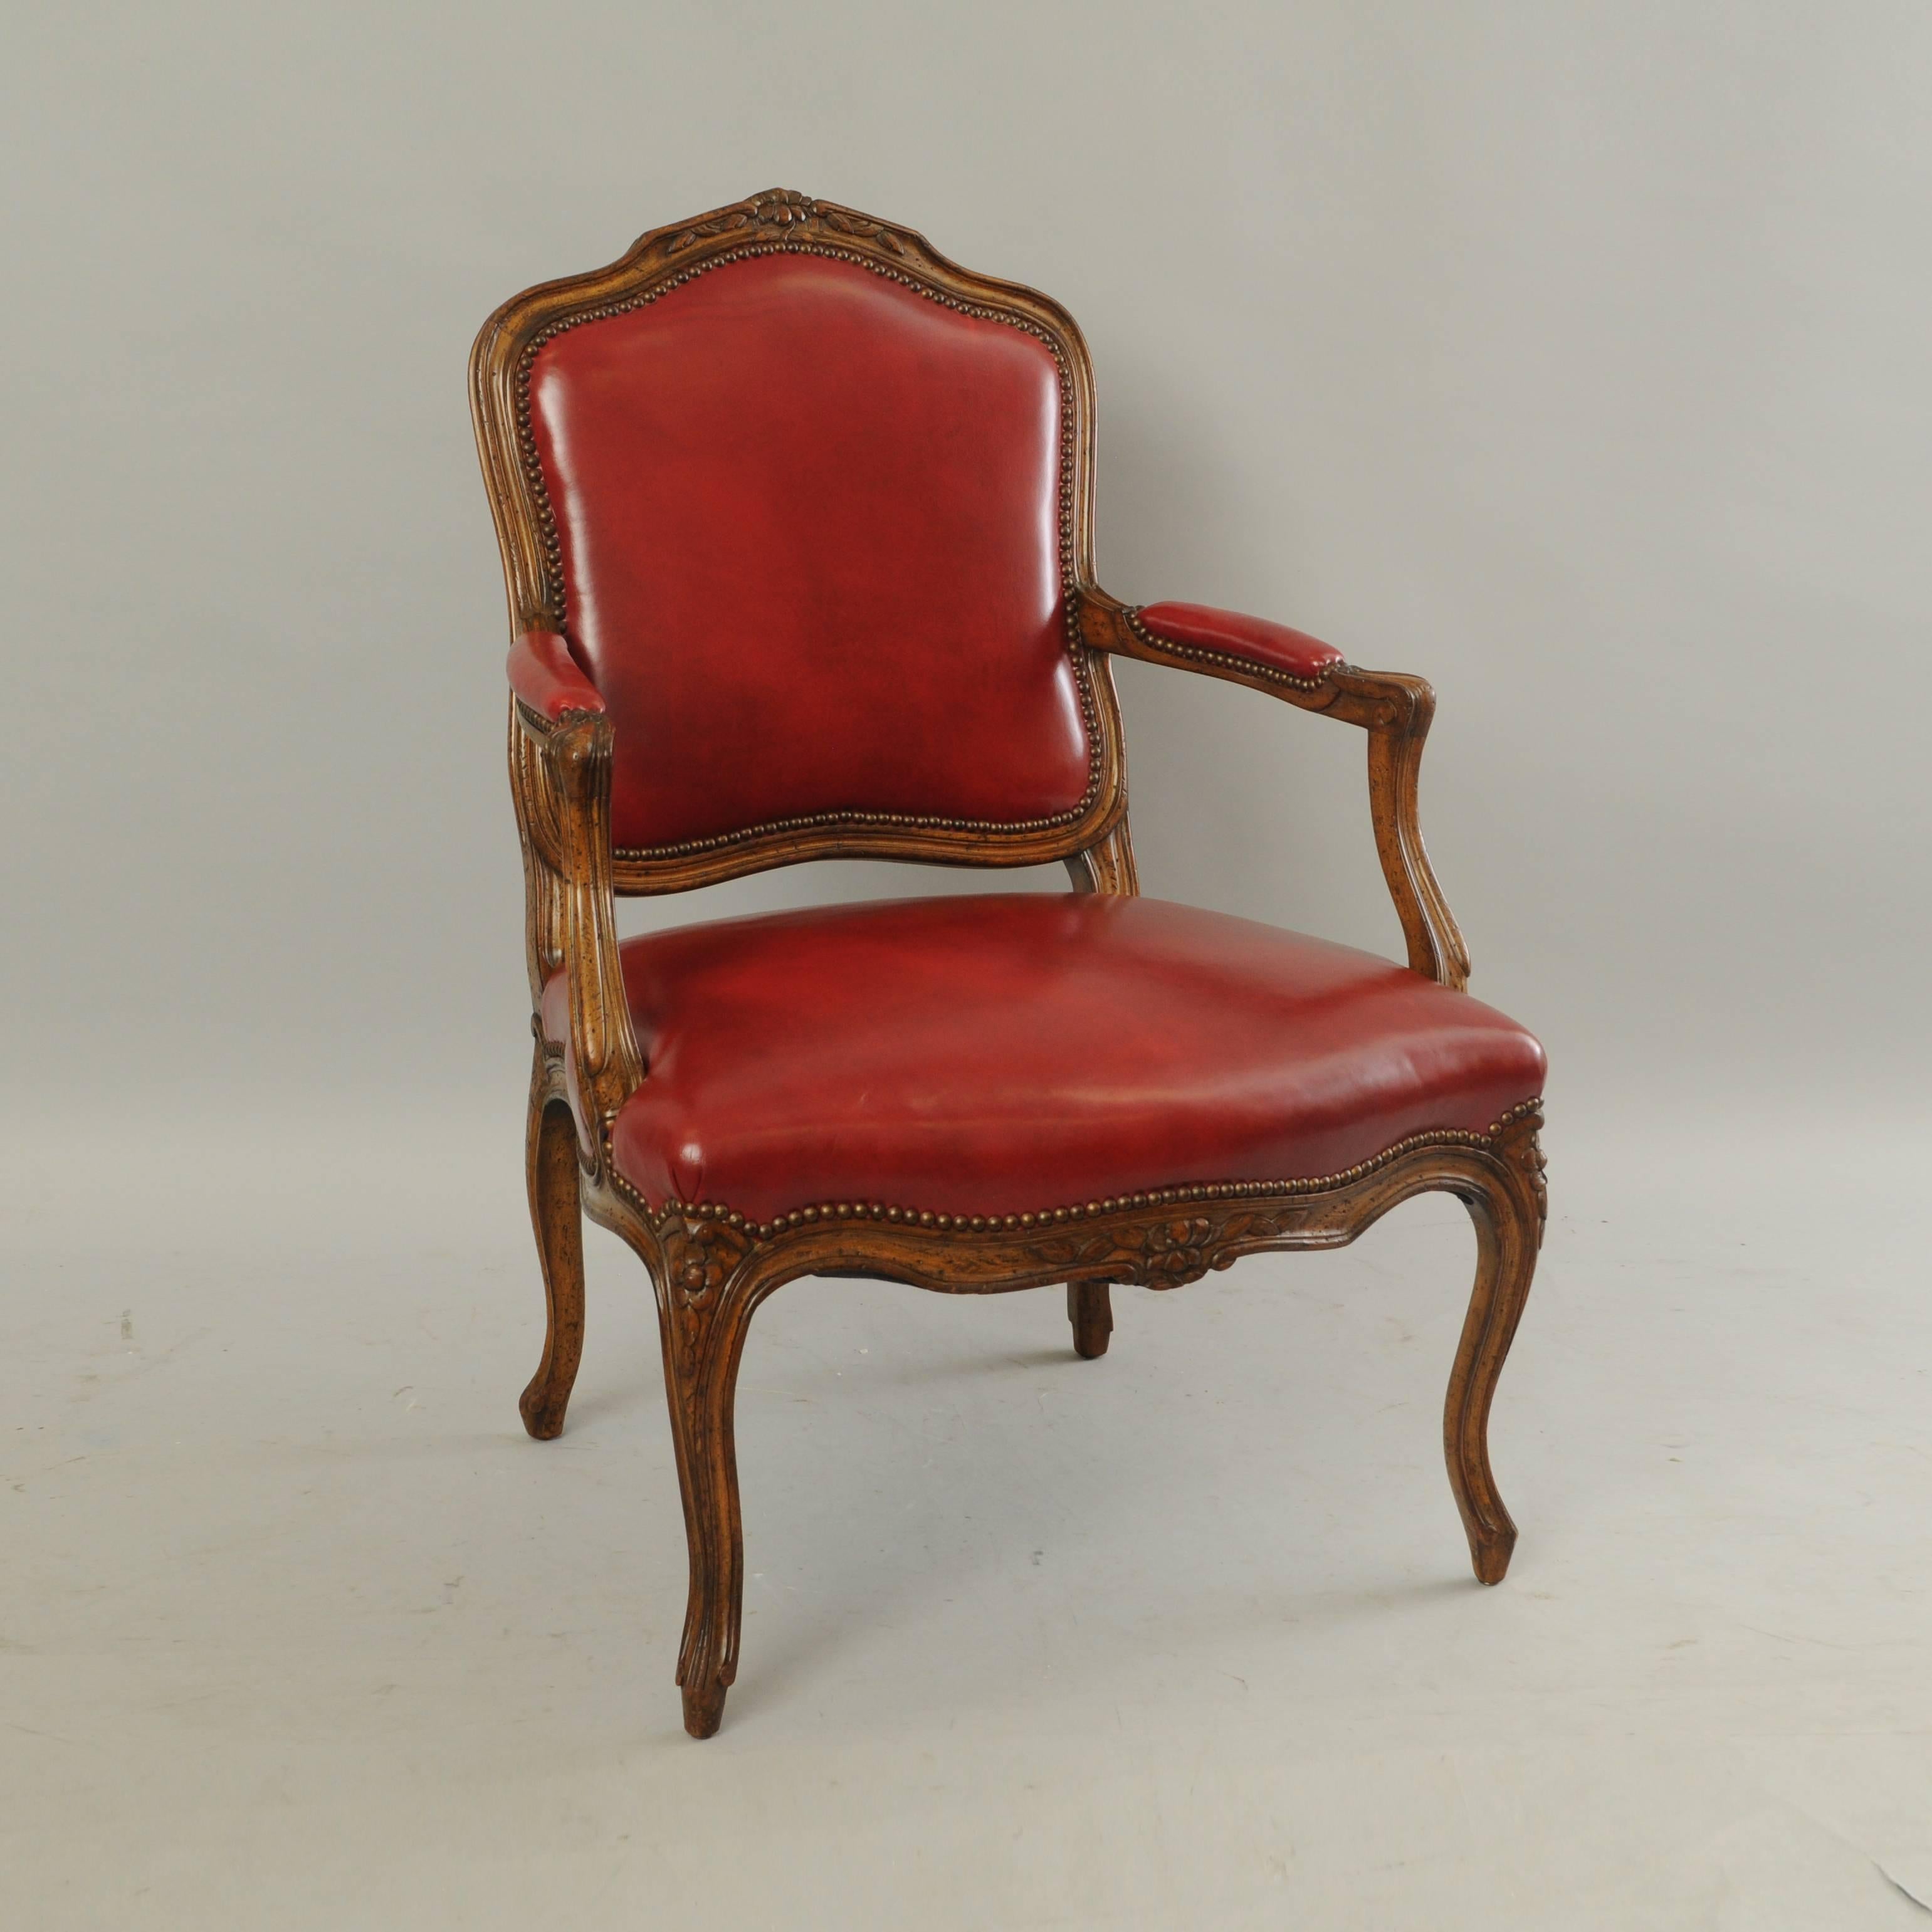 Vintage French Country/Louis XV style armchair in walnut and red leather by Auffray & Co. Item features a solid carved wood frame, red leather upholstery, nailhead trim, cabriole legs, antiqued/distressed finish, original label to underside, great